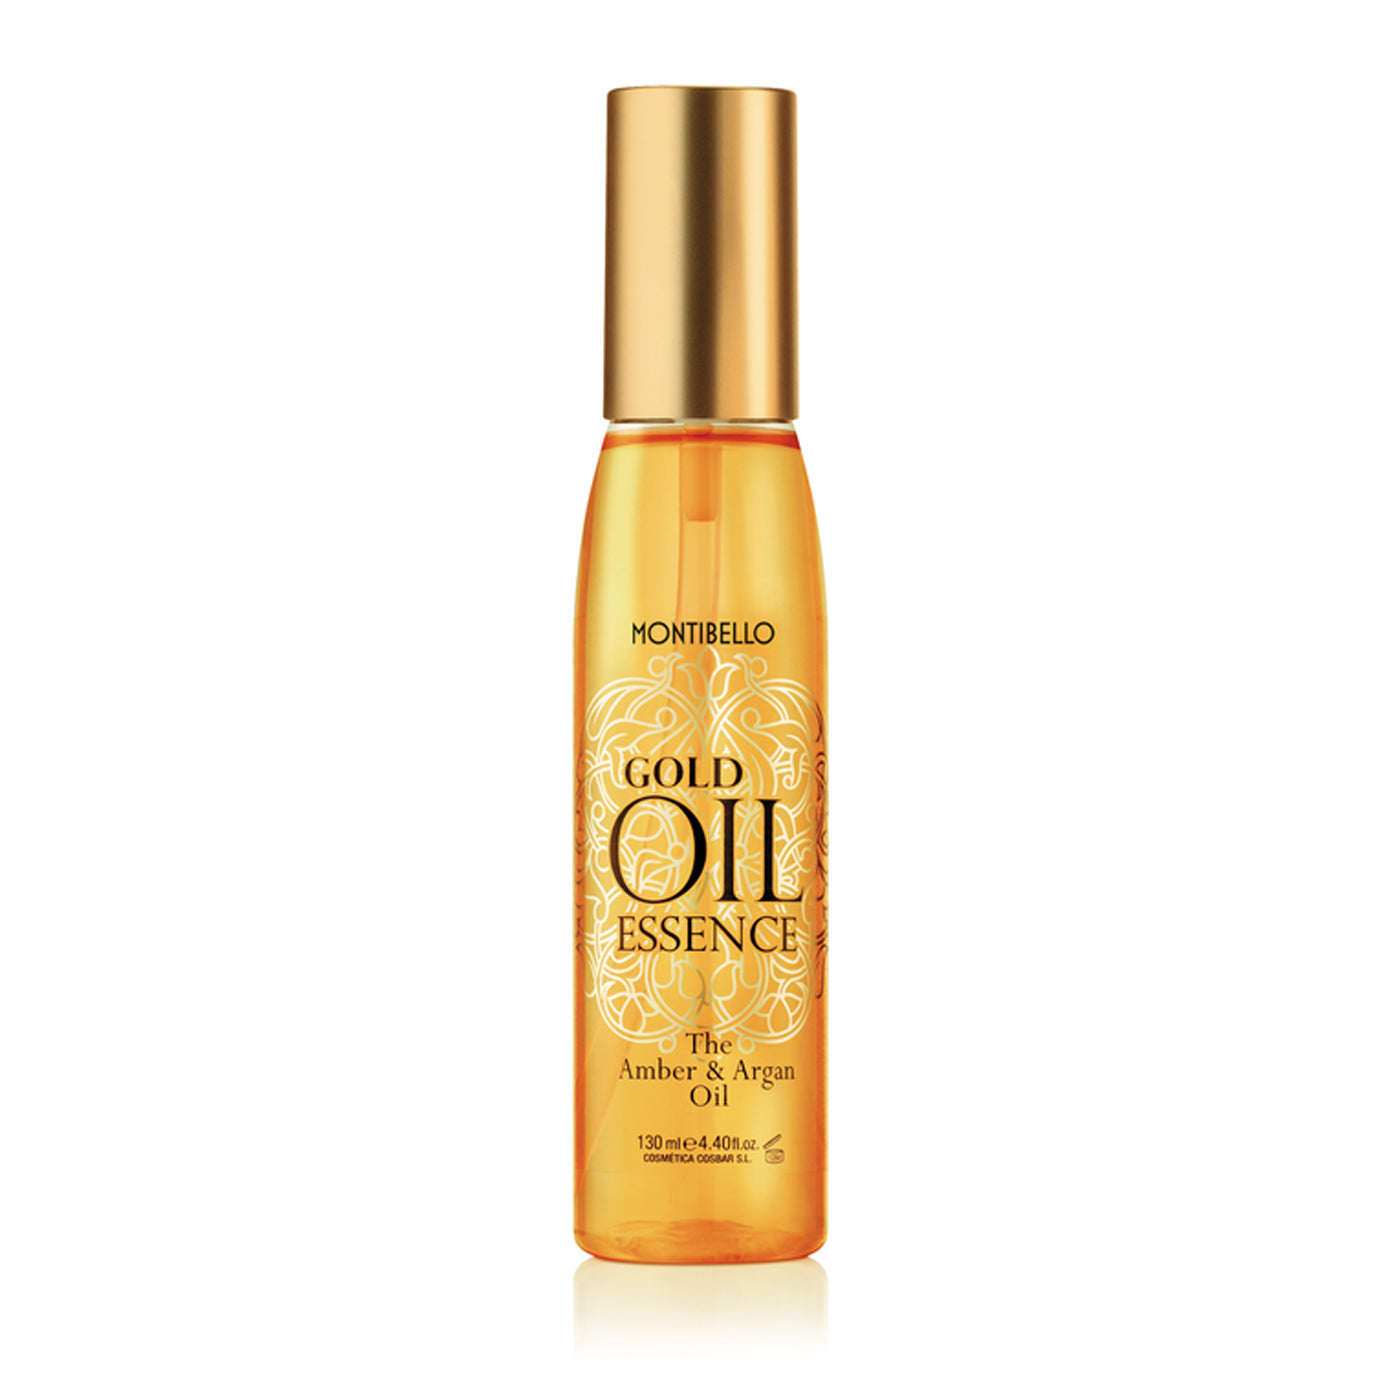 Montibello Gold Oil Essence (130ml) - Ultimate Hair and Beauty